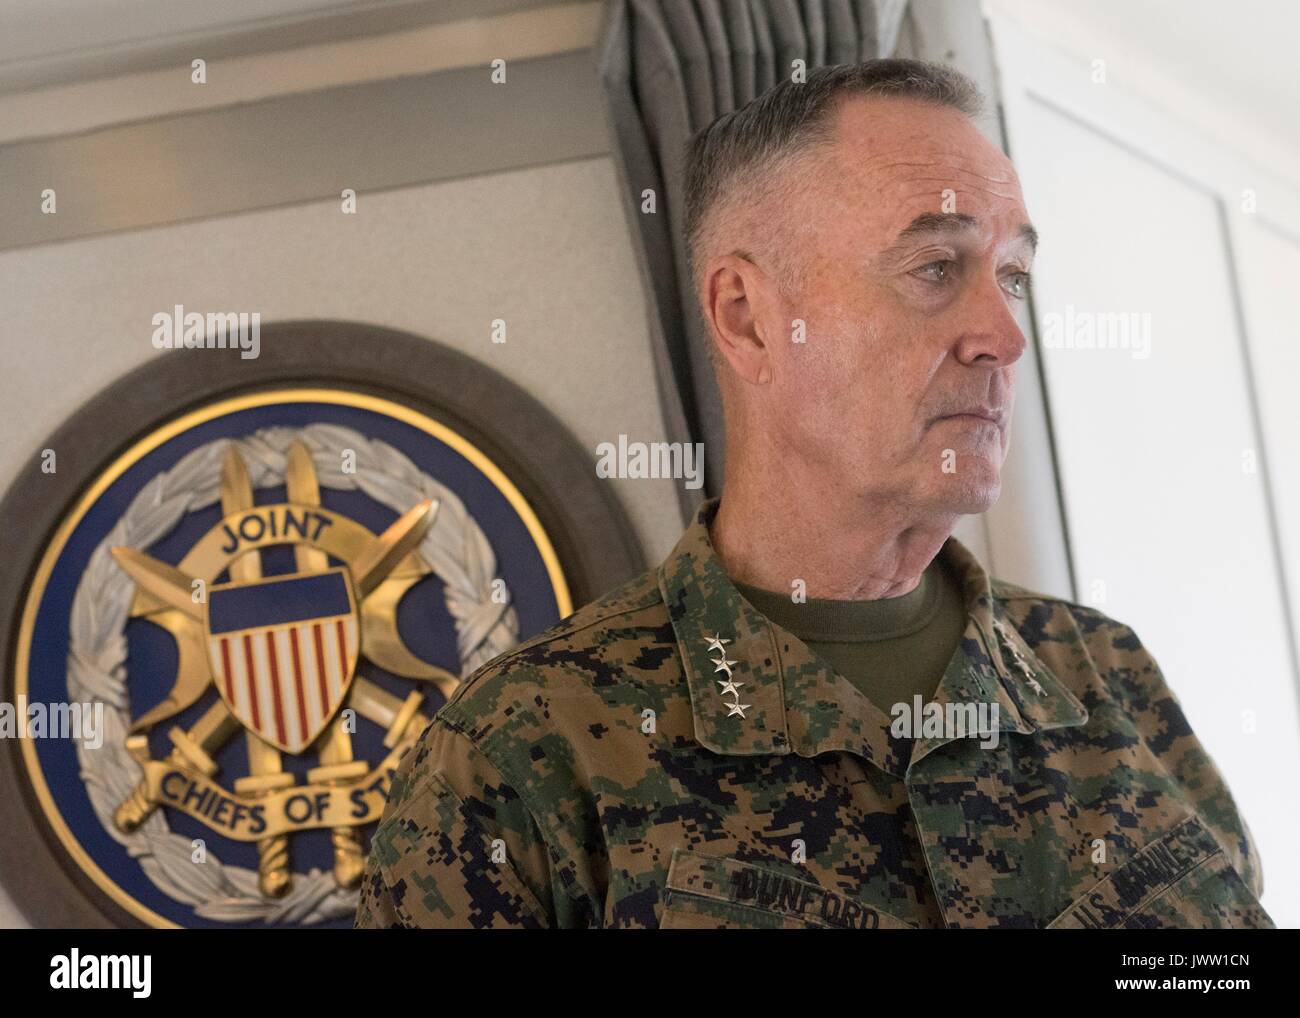 U.S. Chairman of the Joint Chiefs Gen. Joseph Dunford after boarding his aircraft at PACOM Headquarters Joint Base Pearl Harbor-Hickam August 12, 2017 in Honolulu, Hawaii. Dunford is meeting military leaders in the Asia-Pacific region as tensions rise with North Korea over nuclear and ballistic missiles tests. Stock Photo